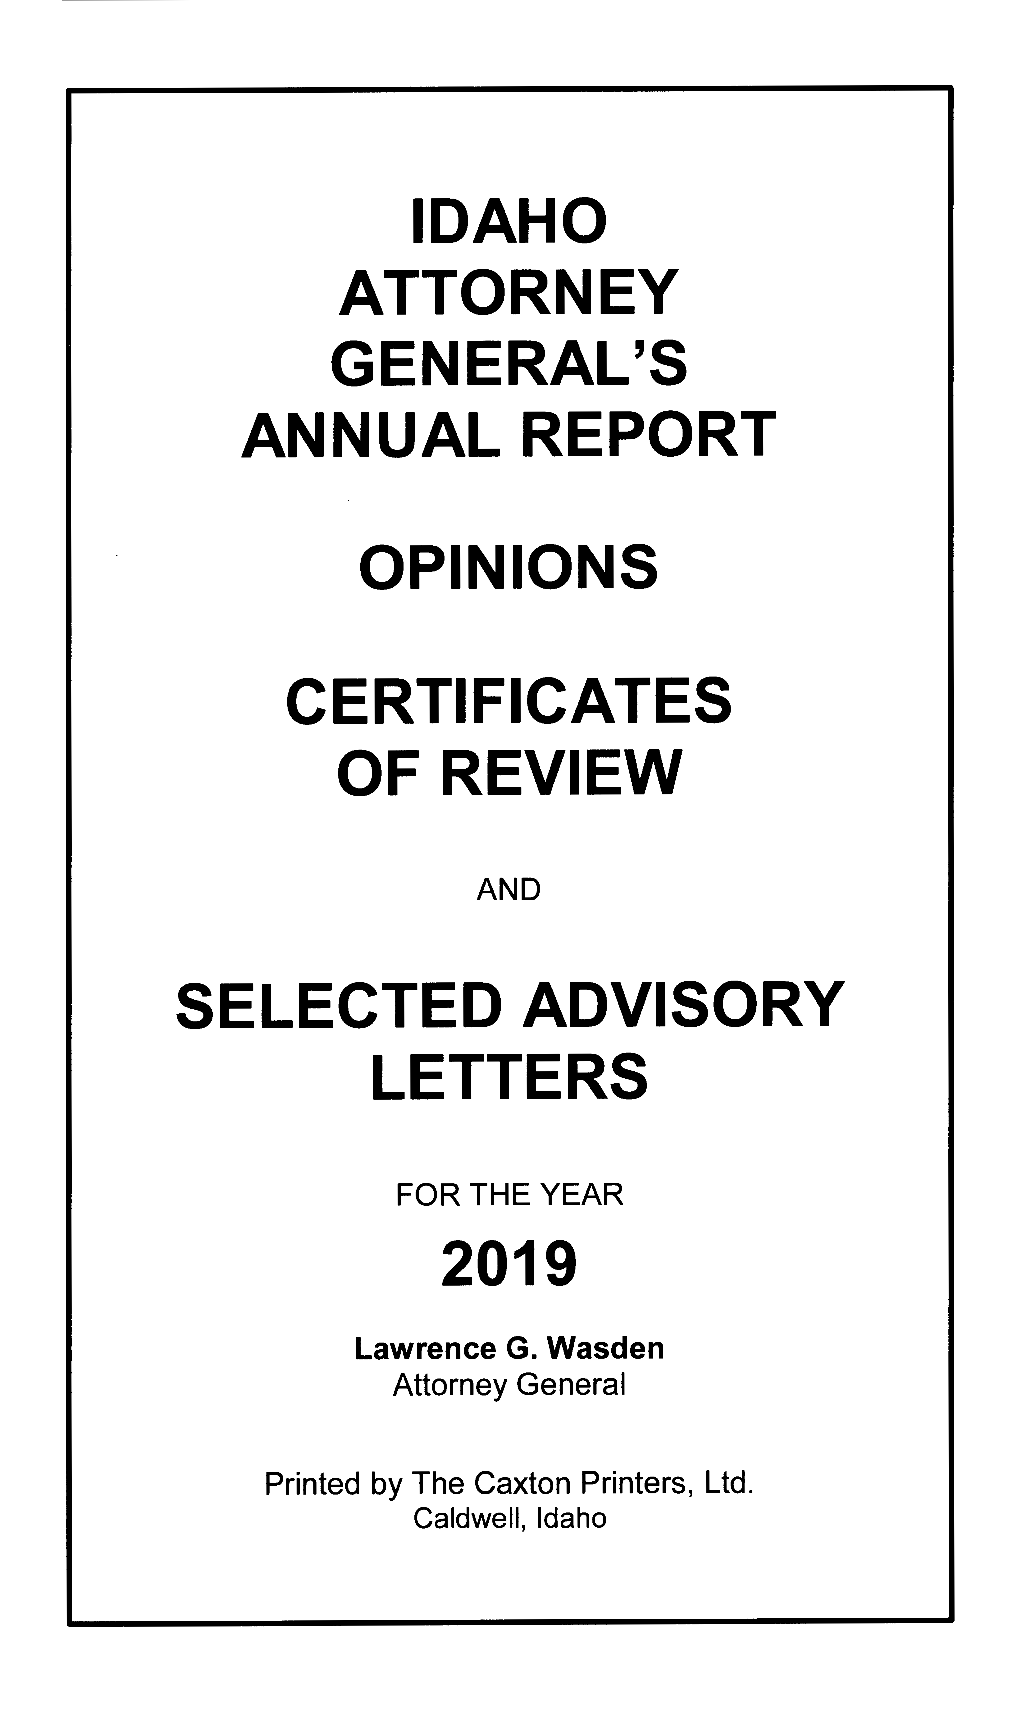 Idaho Attorney General's Annual Report Opinions Certificates of Review